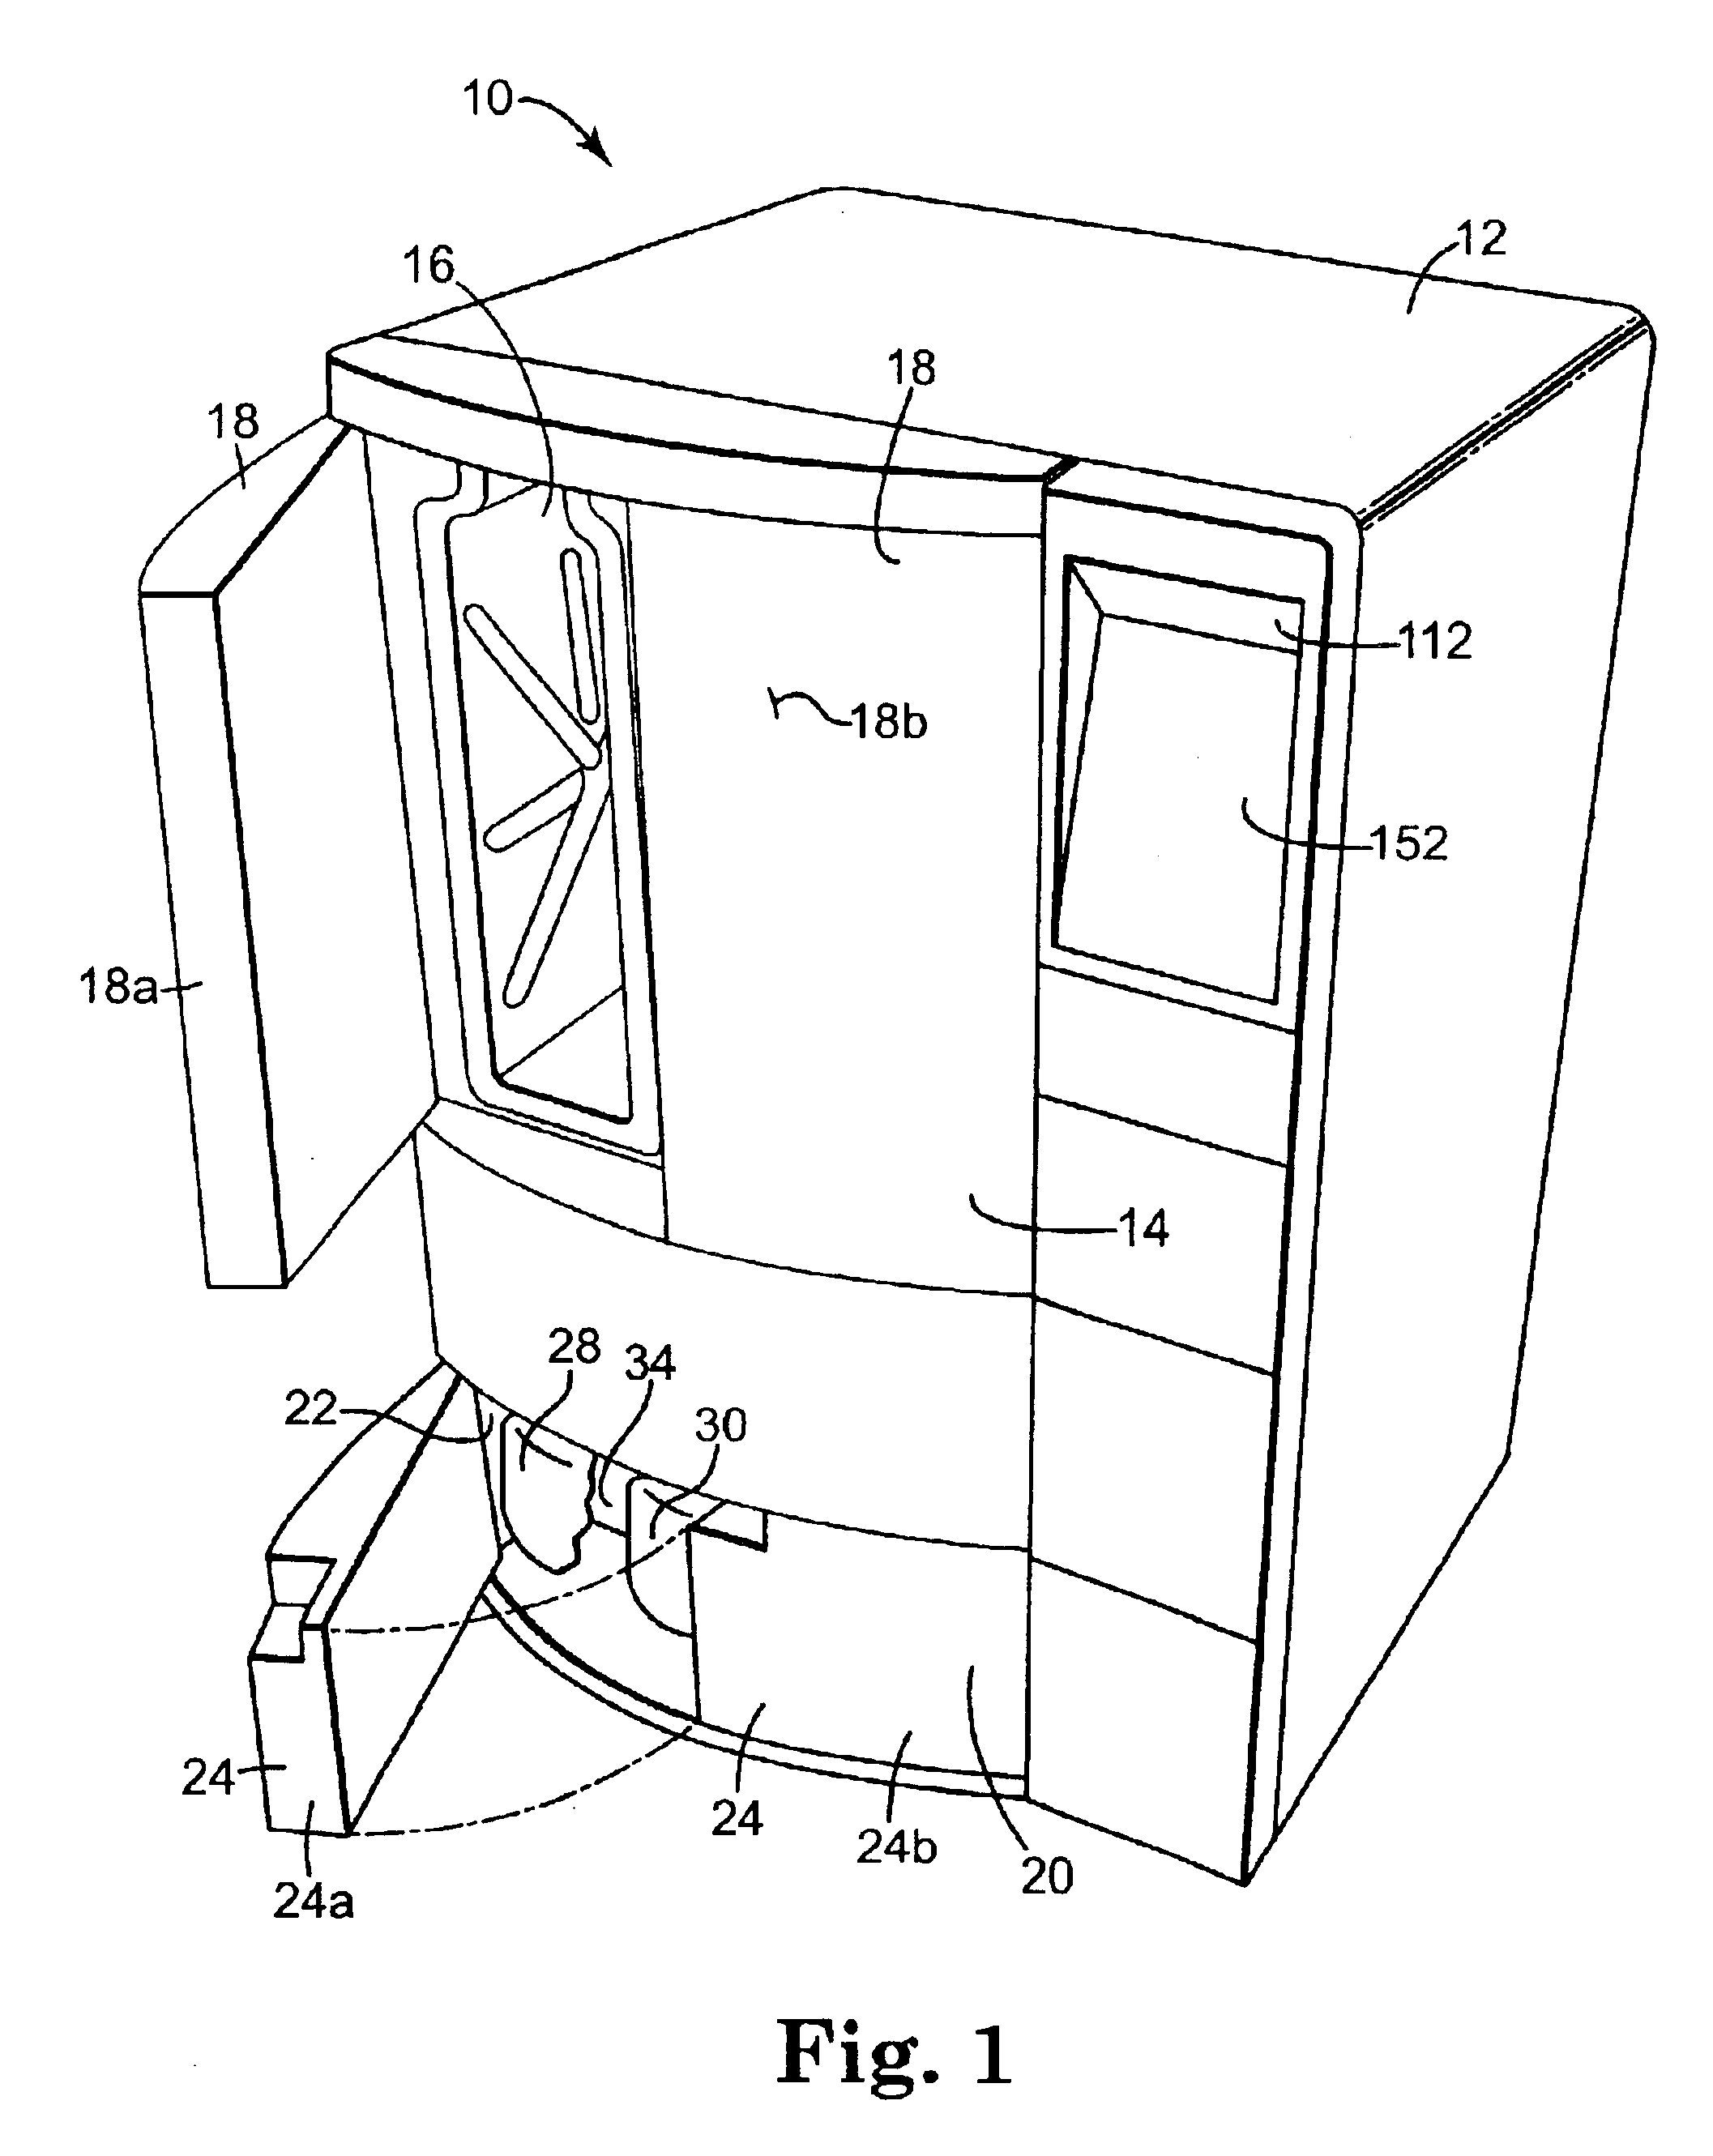 Apparatus and method for steam reprocessing flexible endoscopes